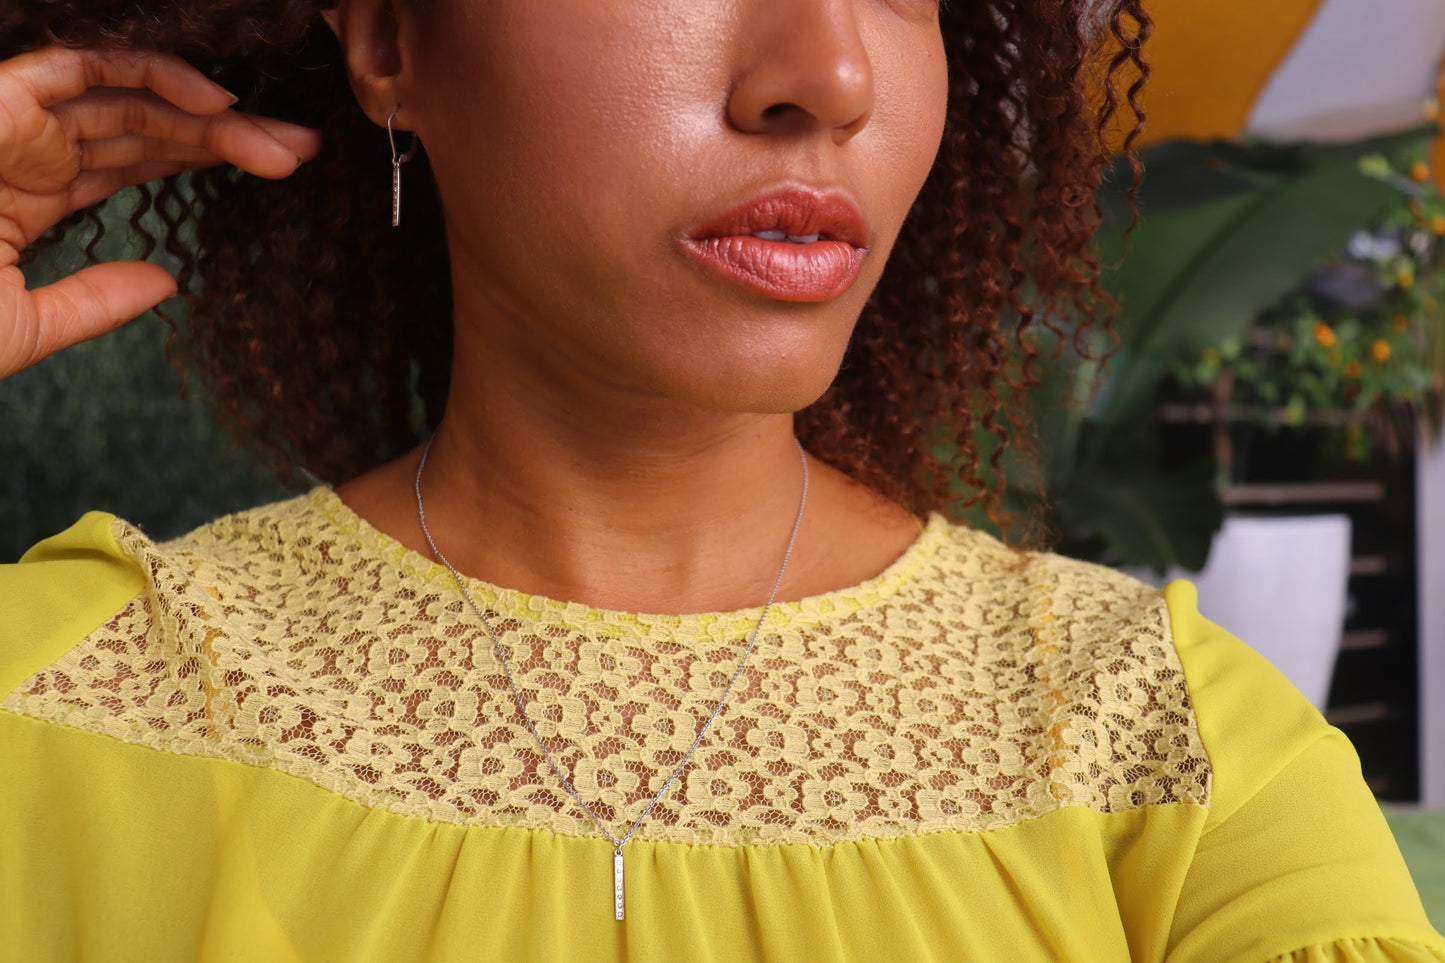 woman in yellow dress with curly hair wearing the 7 diamond pillar earrings and matching necklace from the wandering jewel